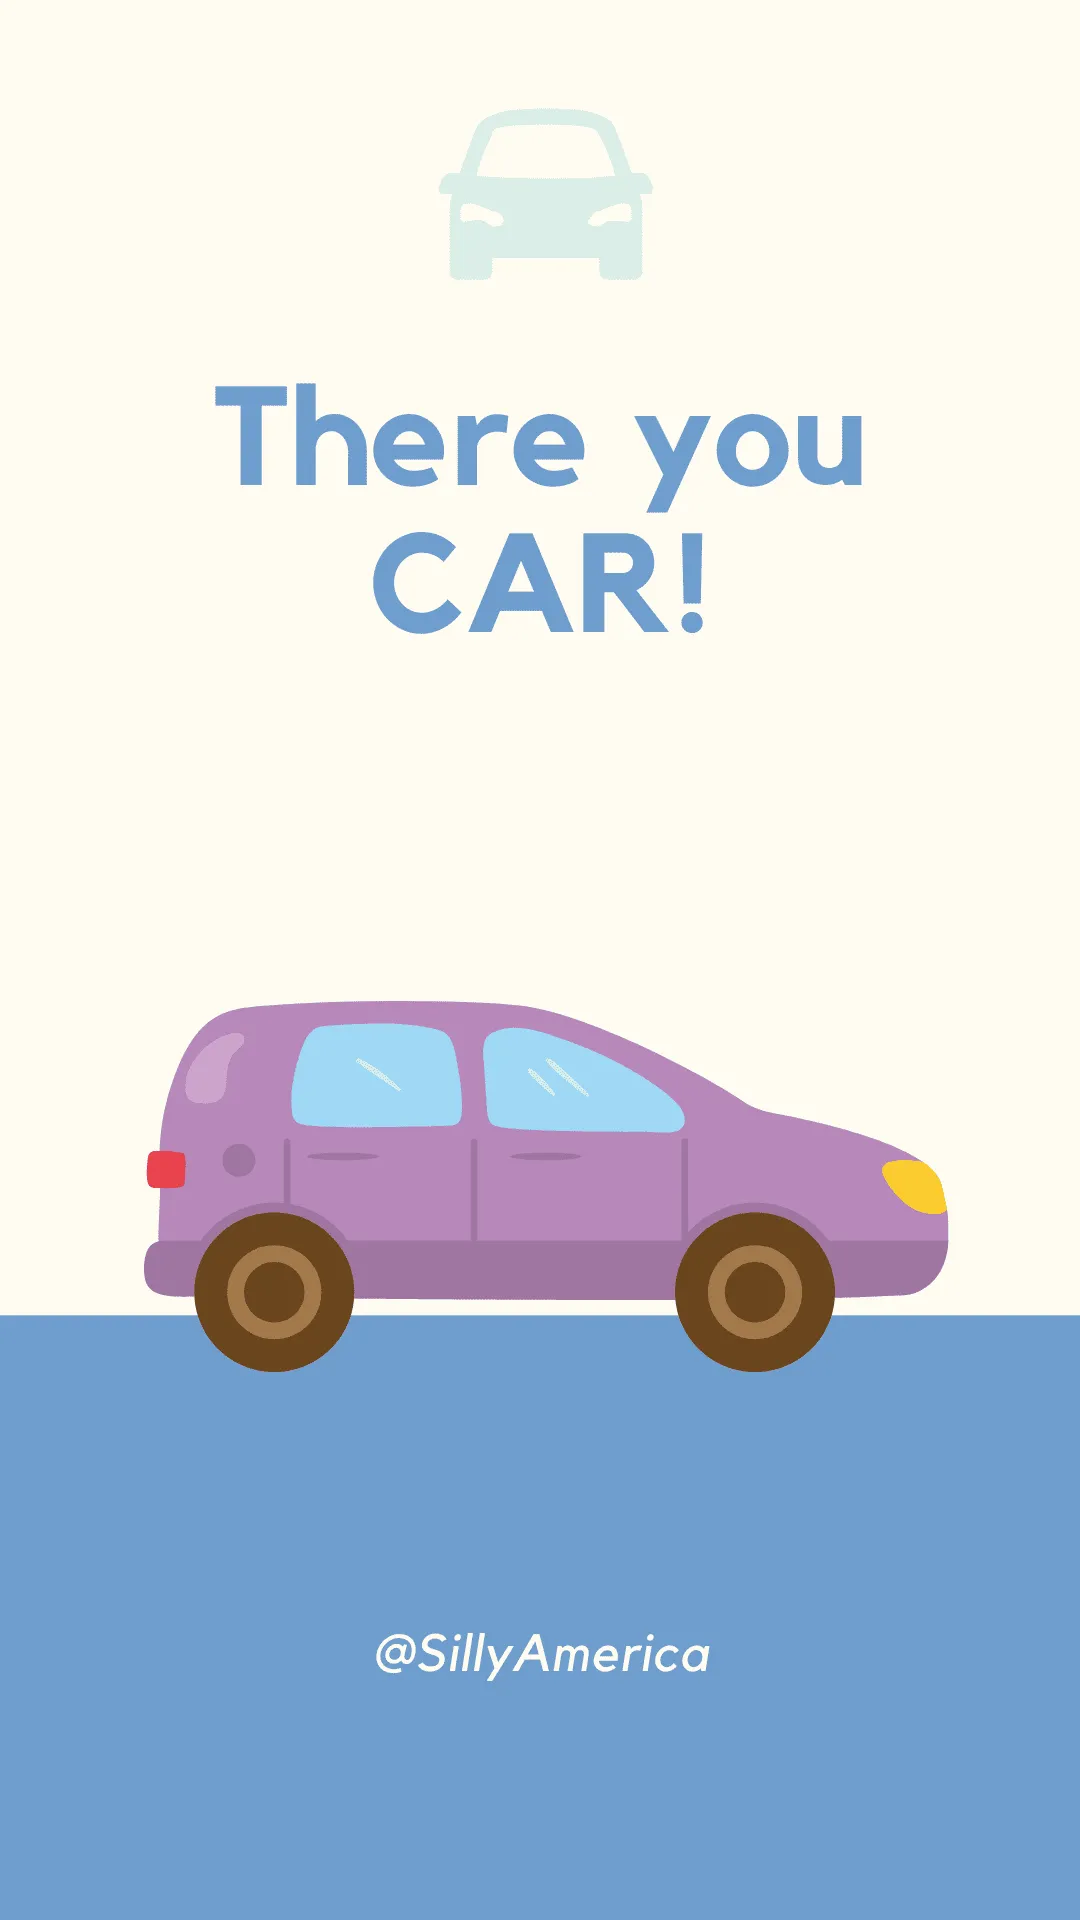 There you CAR! - Car Puns to fuel your road trip content!